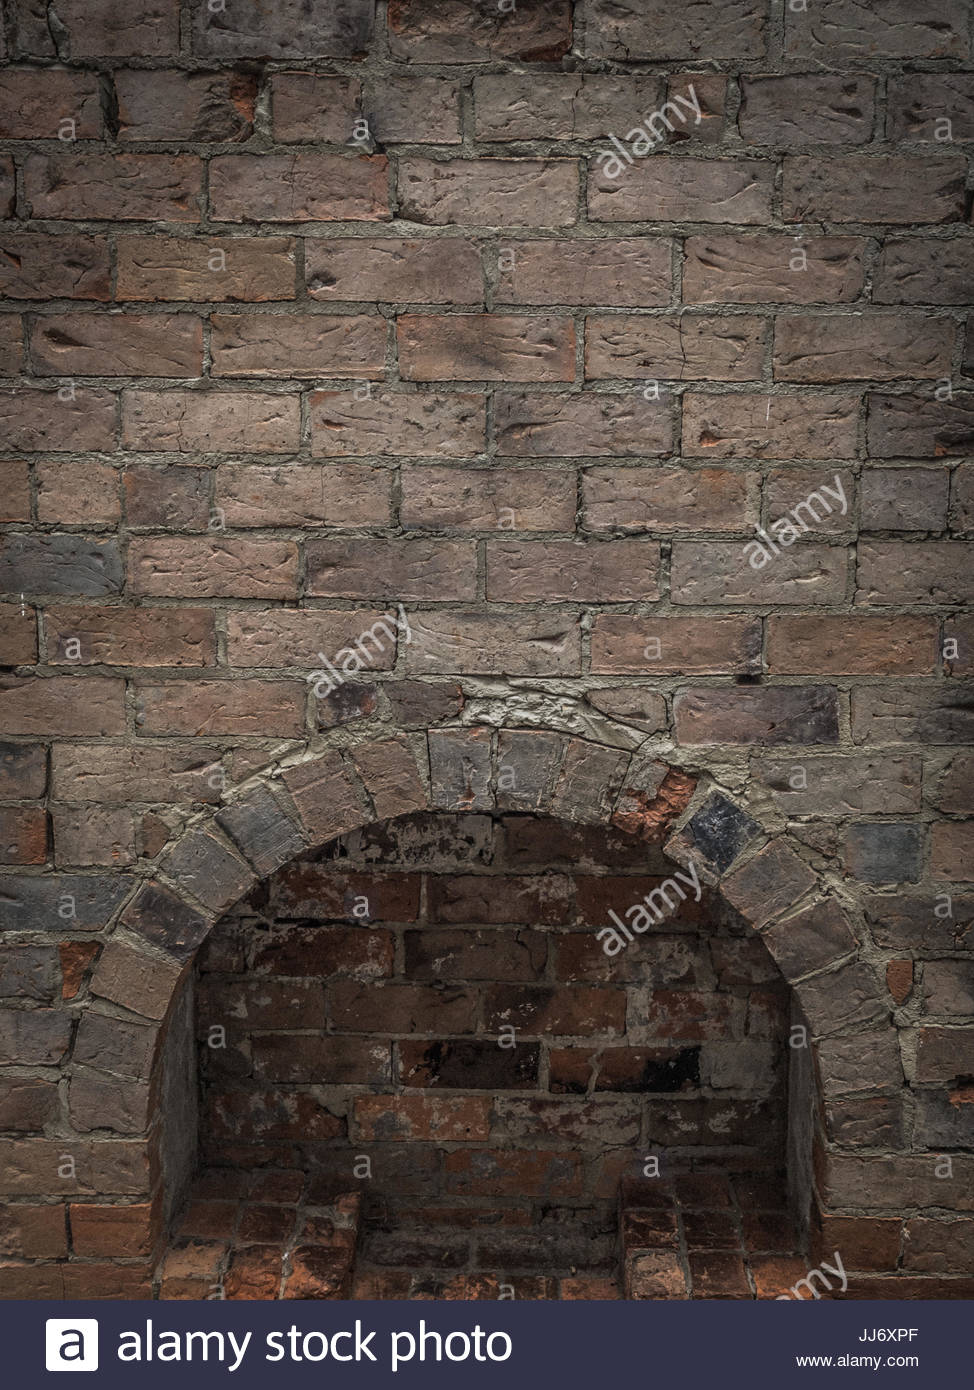 Arched Fireplace Door Best Of Brick Arch Fireplace Stock S & Brick Arch Fireplace